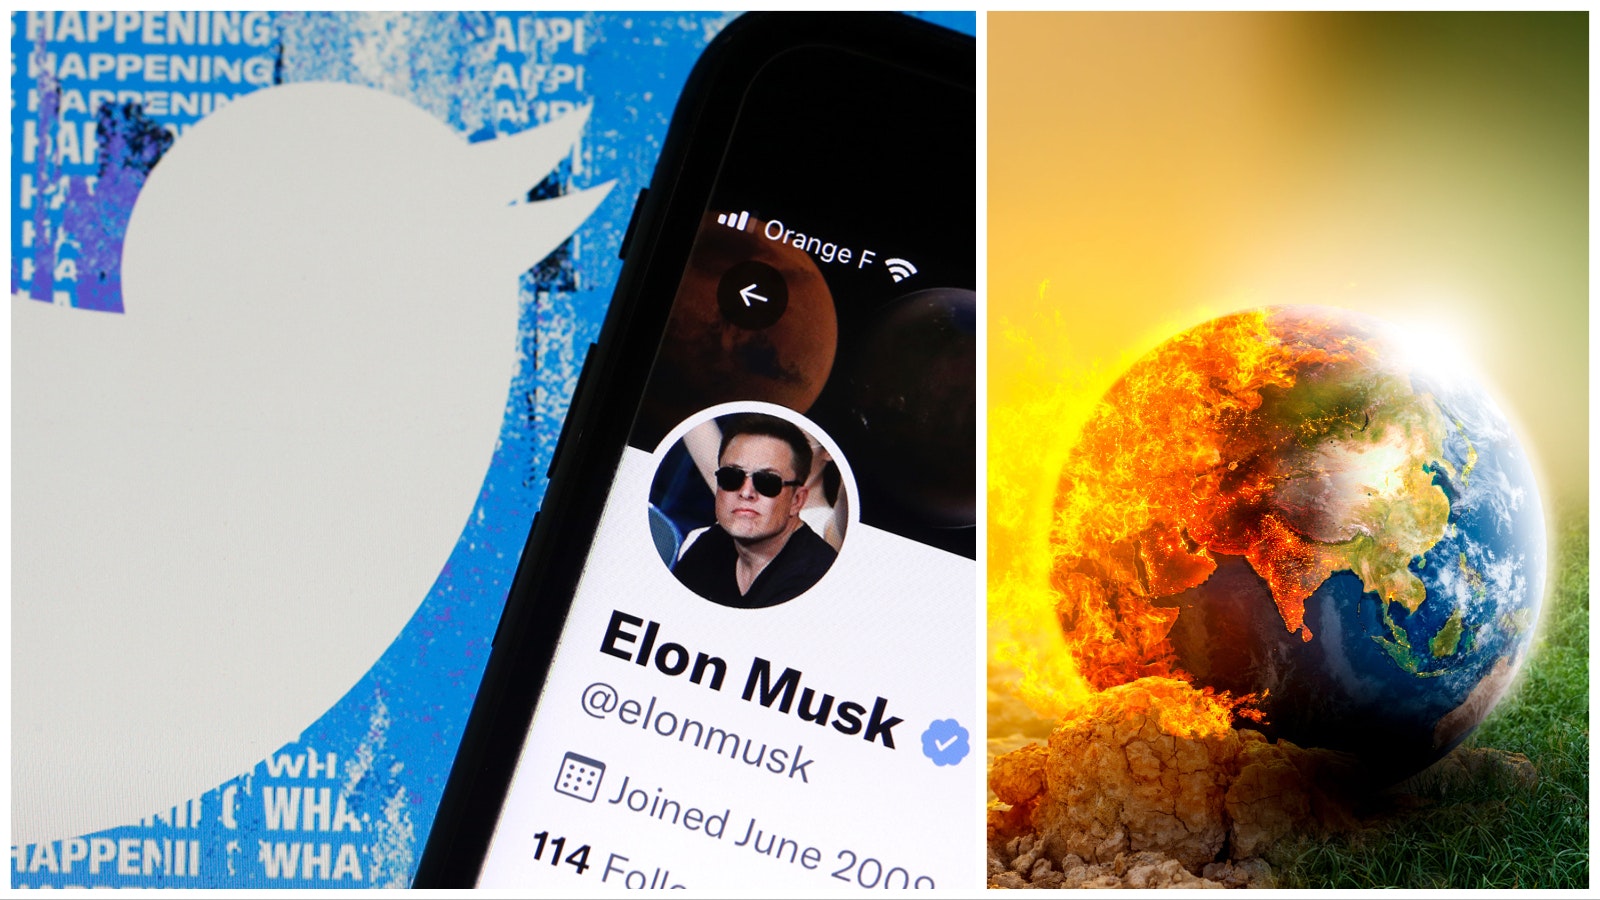 Since Elon Musk's takeover of Twitter, the percentage increase in followers of climate “delayer/denier” users has been far greater than climate change activists.